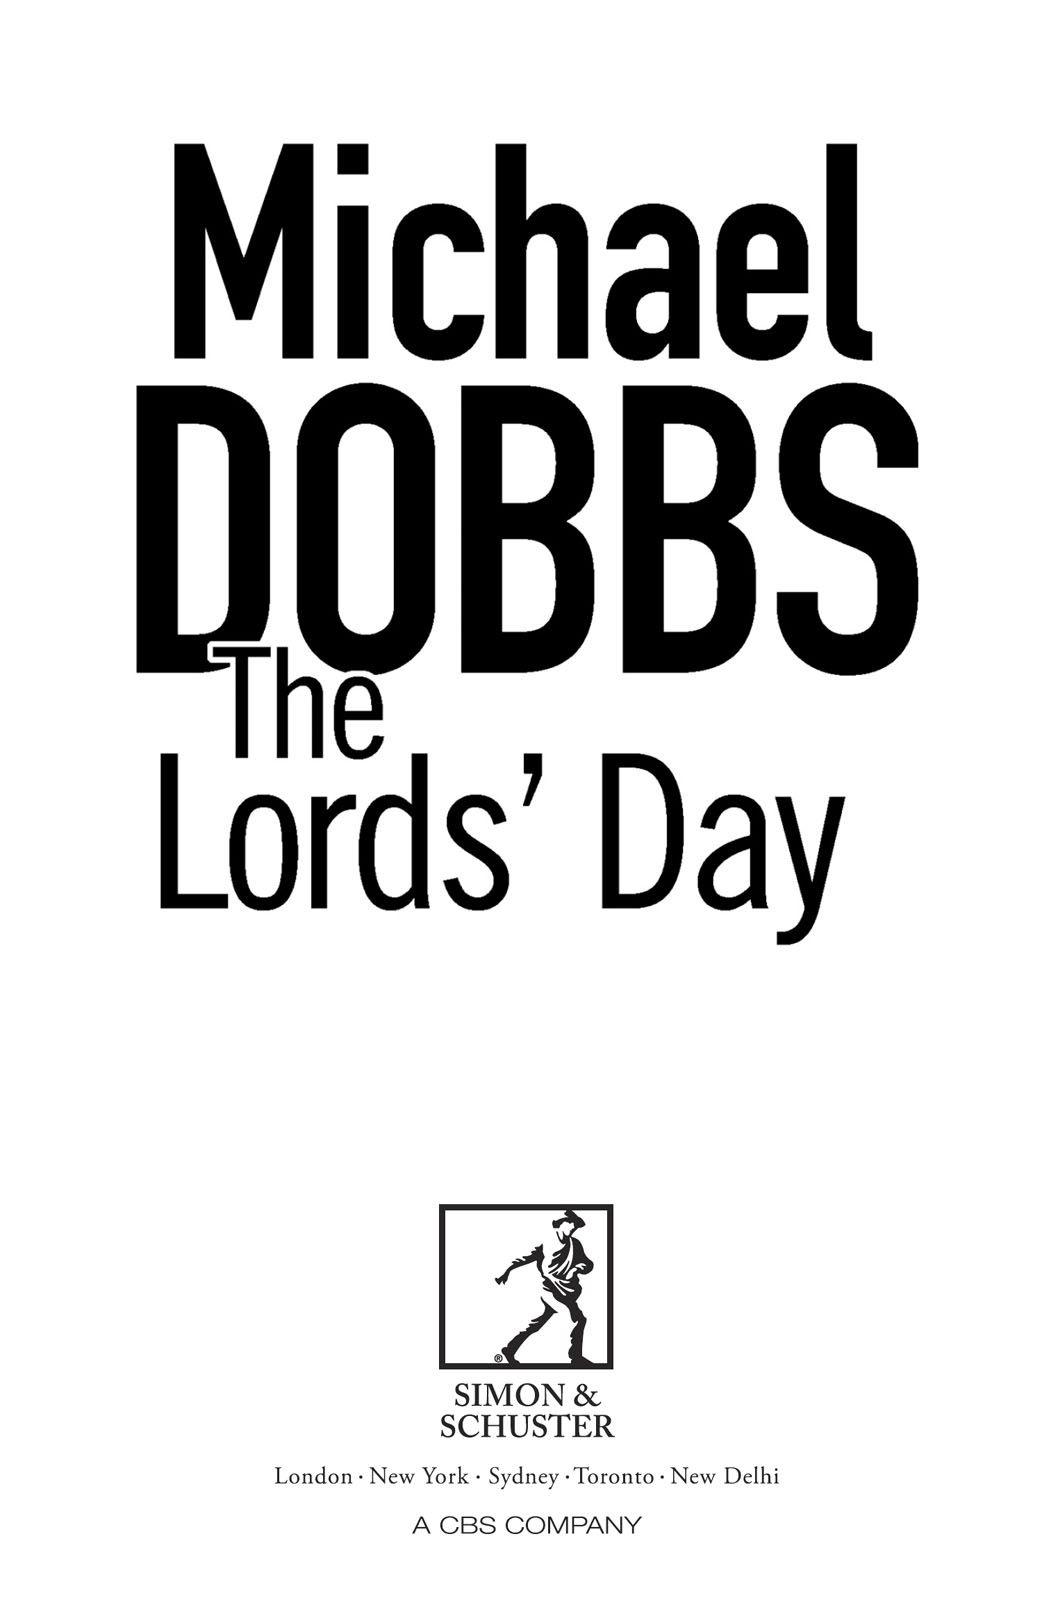 The Lords' Day (retail) by Michael Dobbs